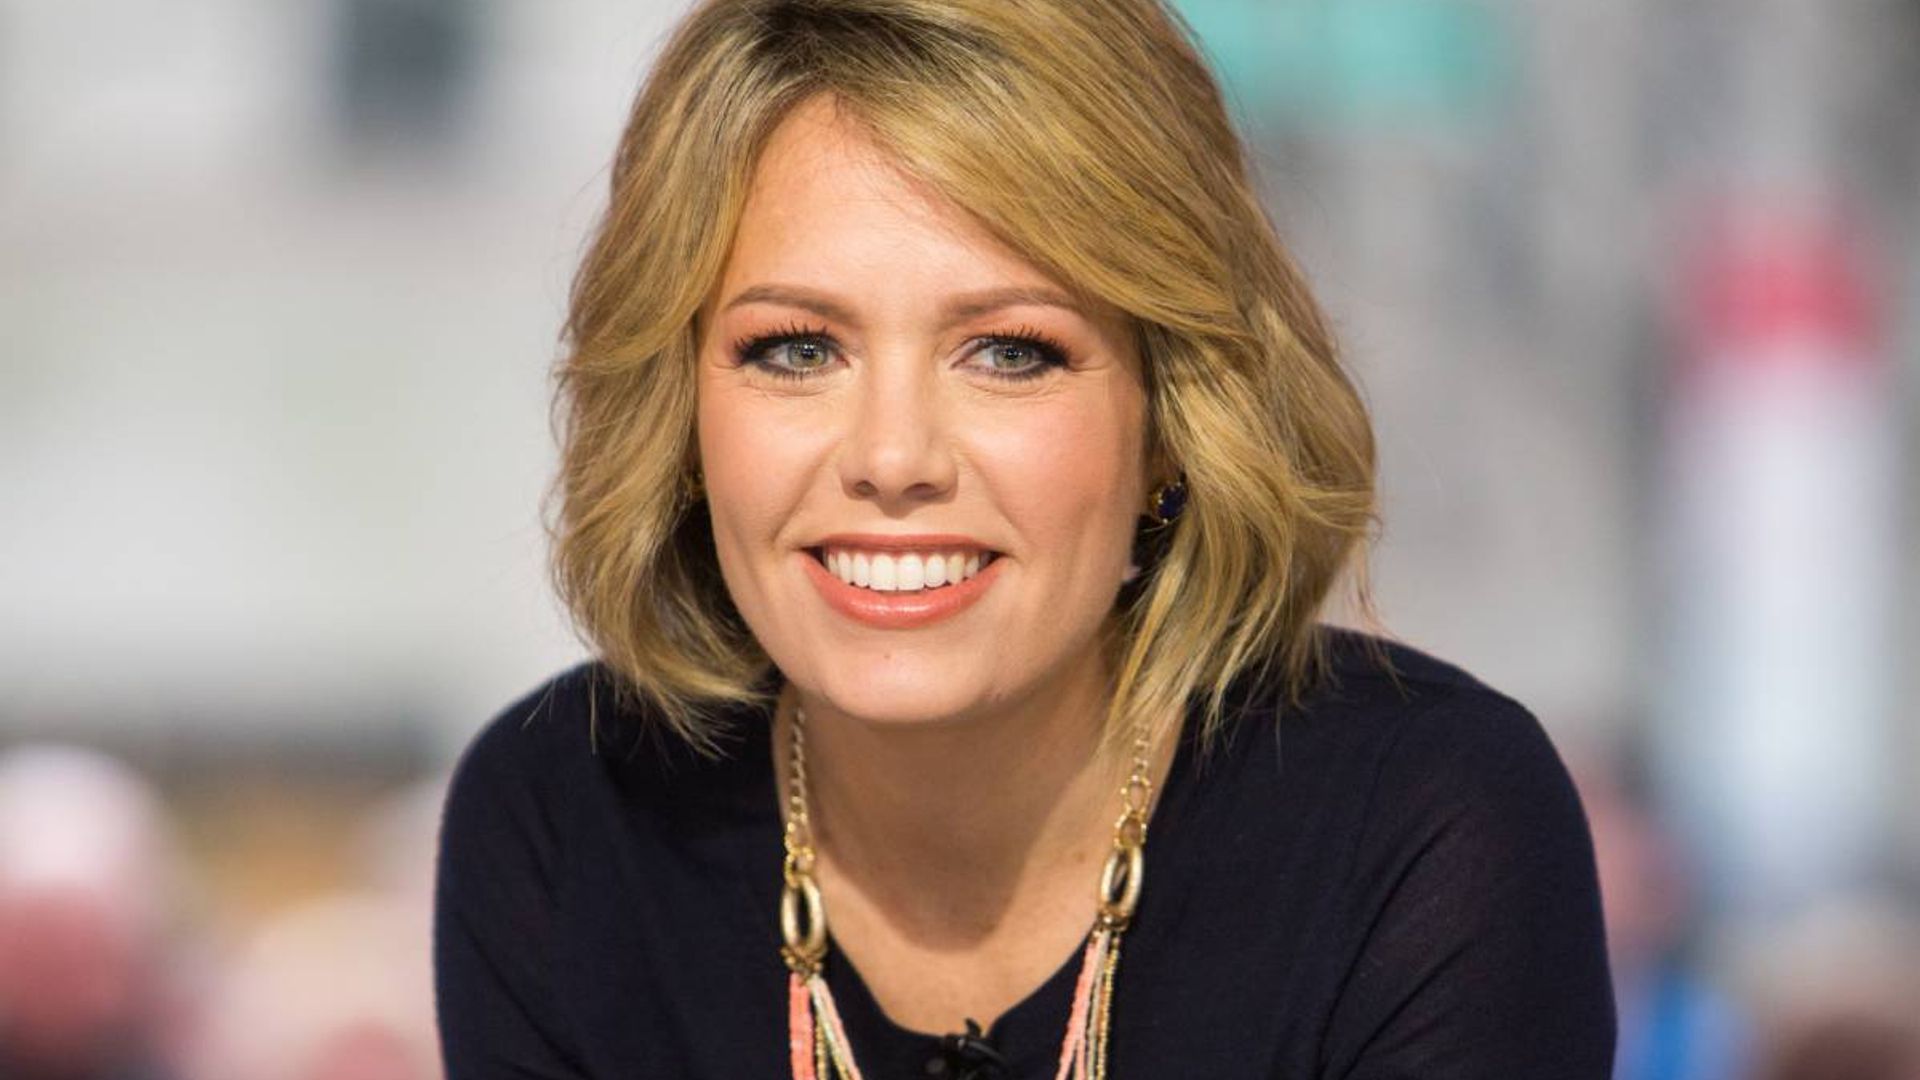 Dylan Dreyer marks special celebration with baby son Rusty in adorable new photo